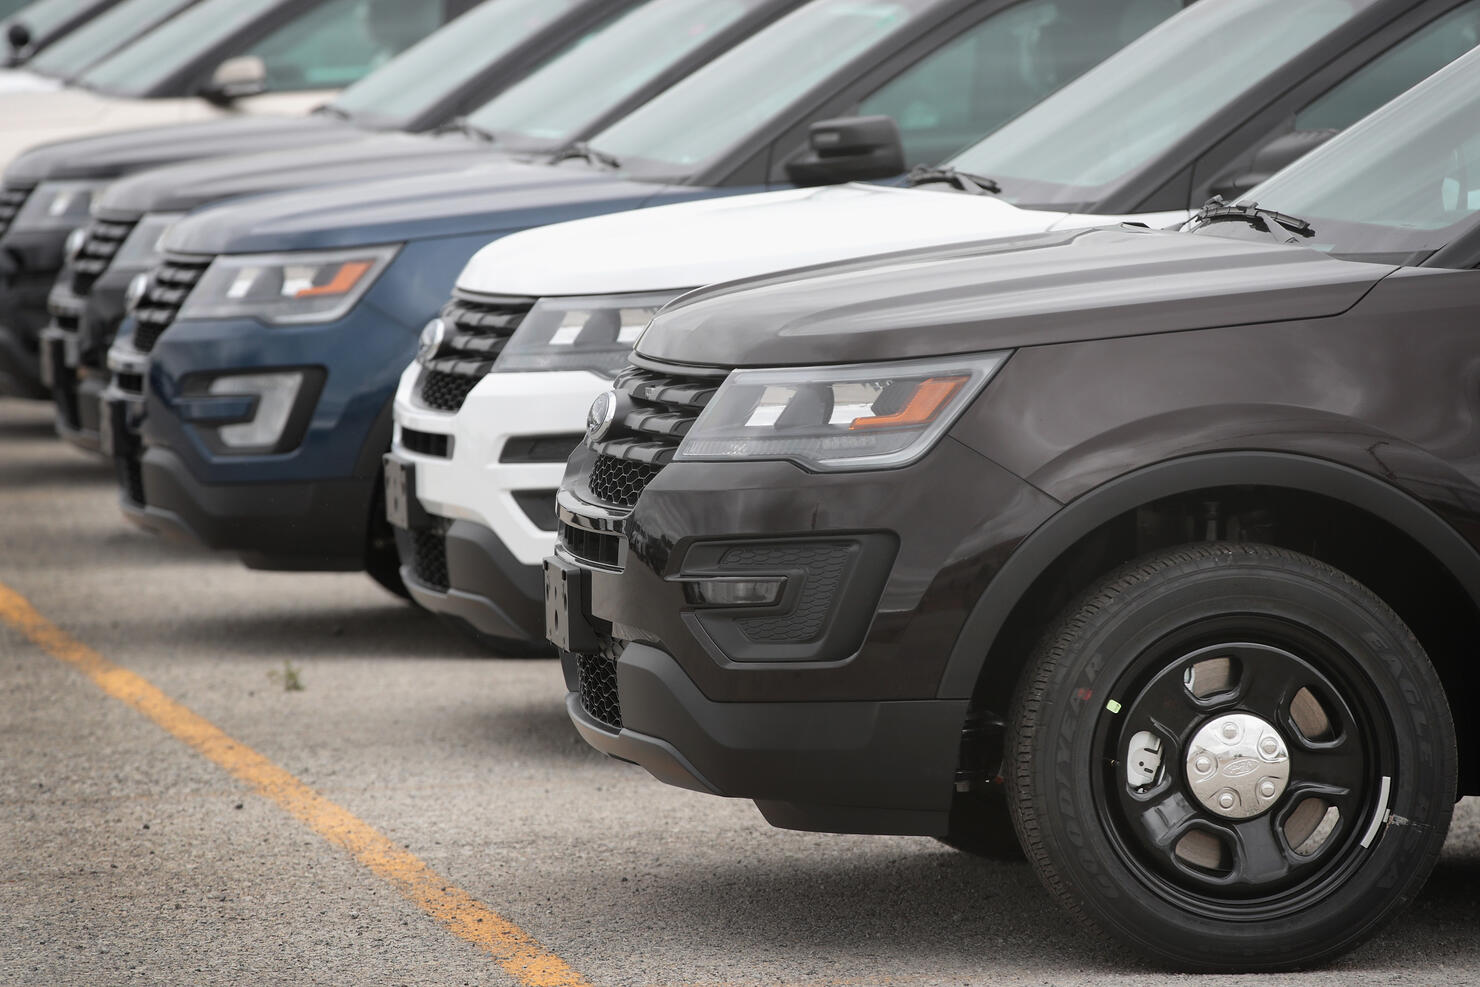 Ford Recalls Nearly 2 Million Explorer SUVs Over Risk Of Parts Flying